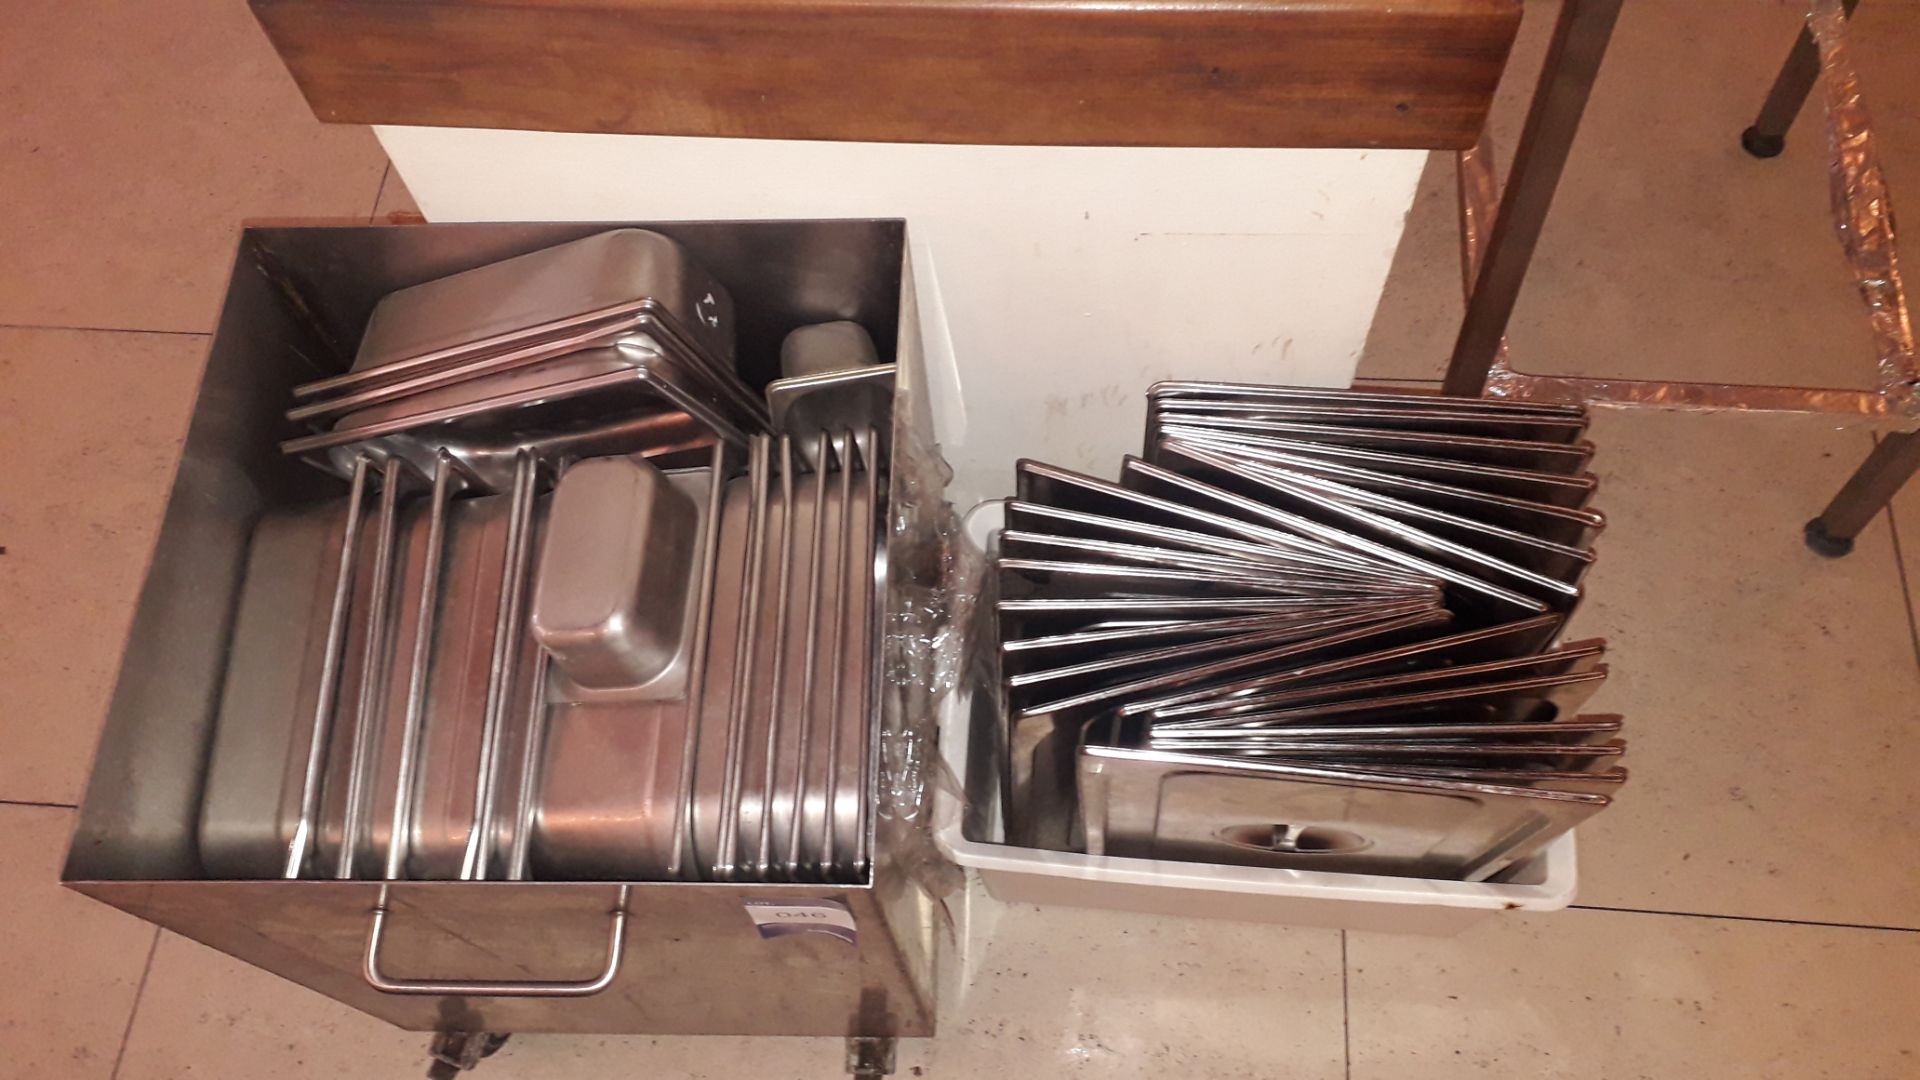 Quantity of stainless steel Gastronorm Pans, Lids & aluminium Ingredients Bin - Image 2 of 2